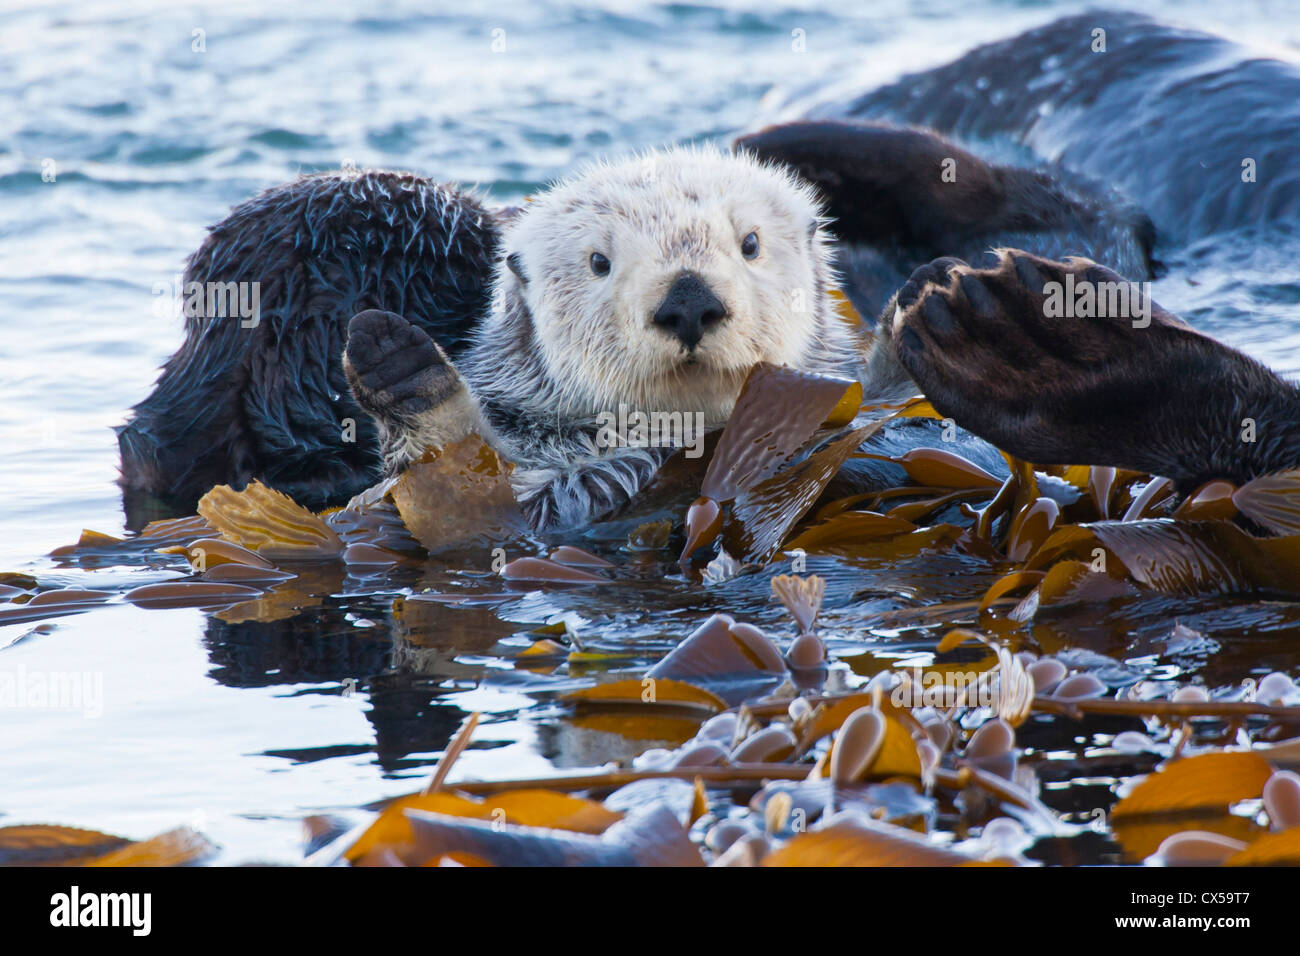 Sea Otter Floating In Kelp Stock Photos & Sea Otter Floating In ...